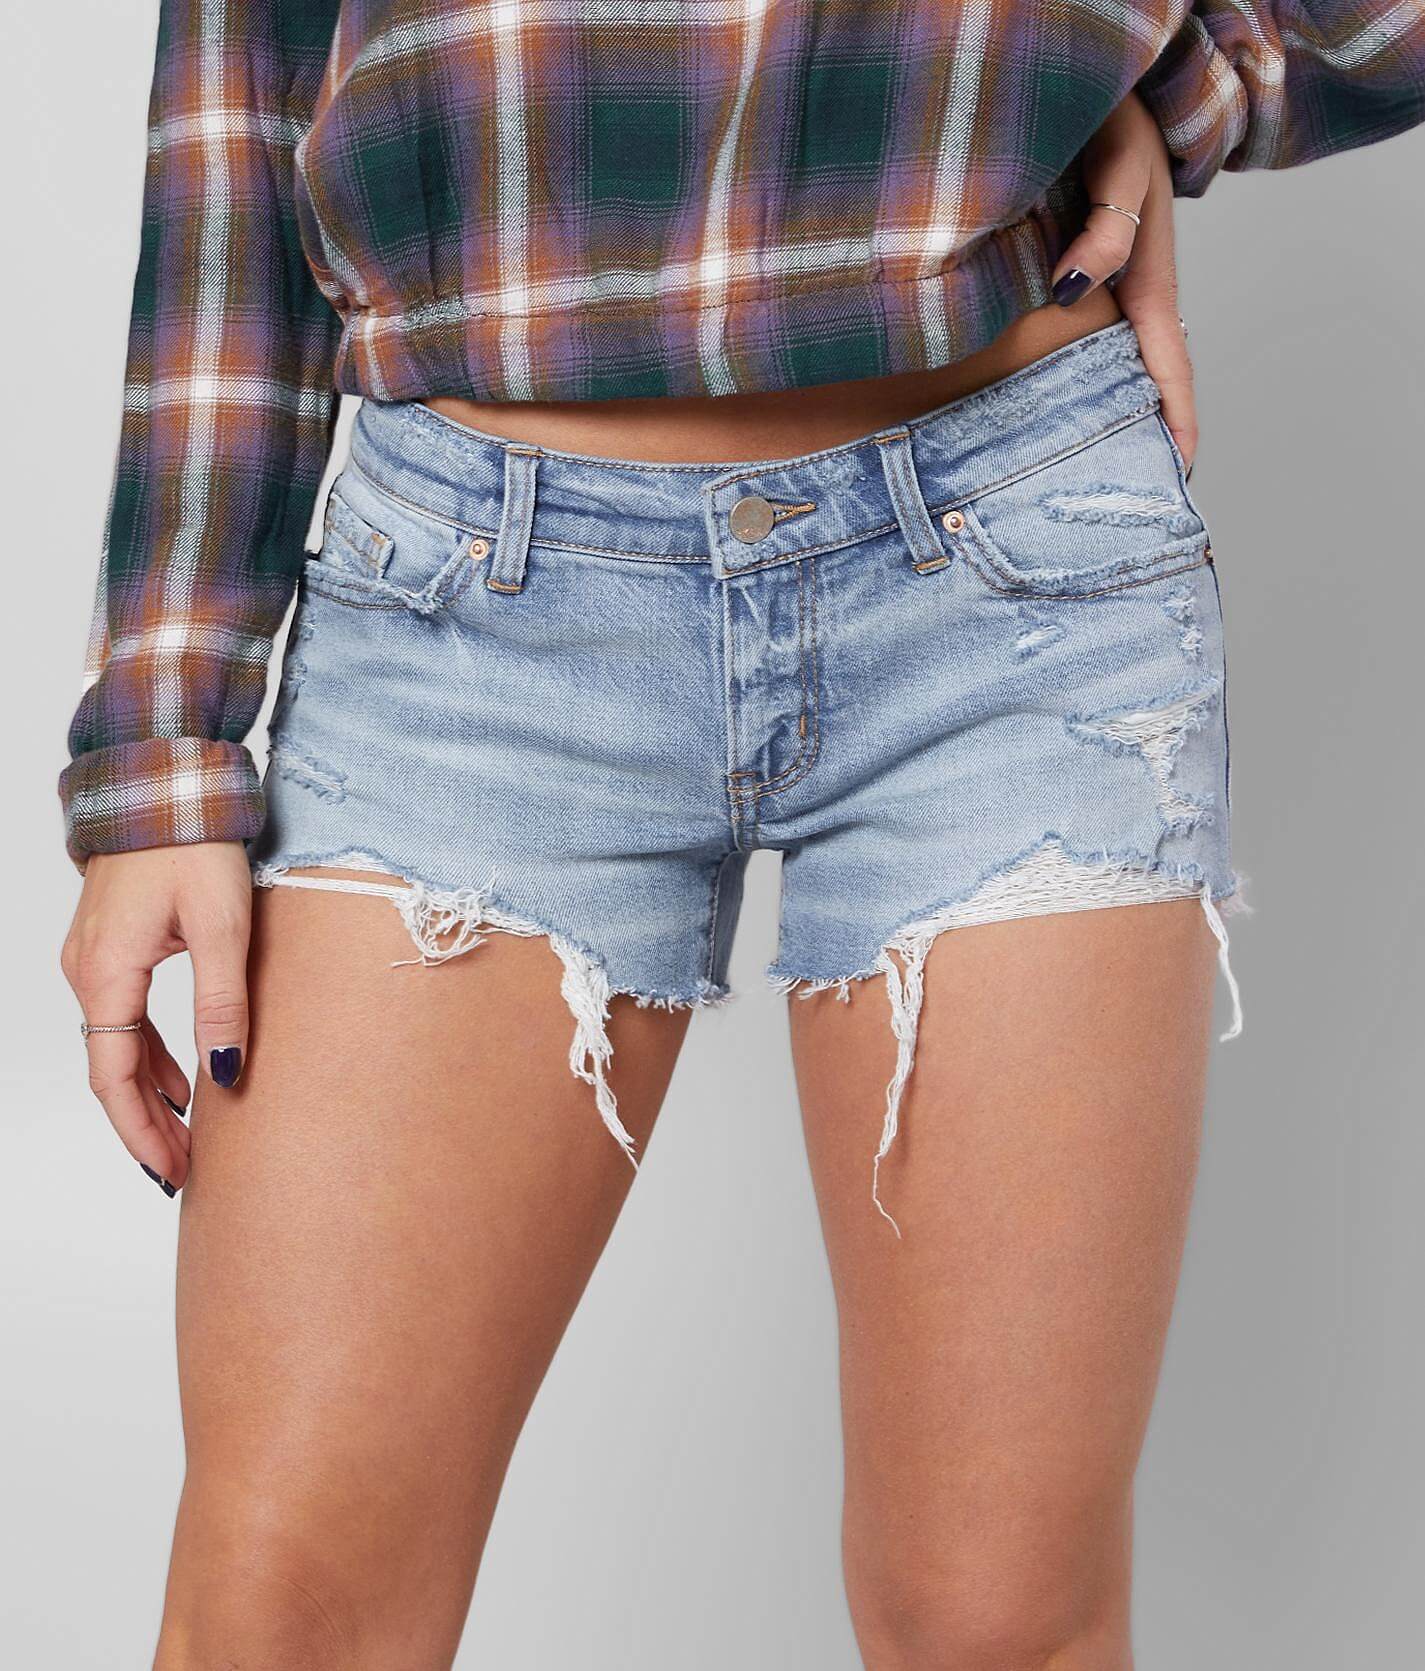 low rise shorts